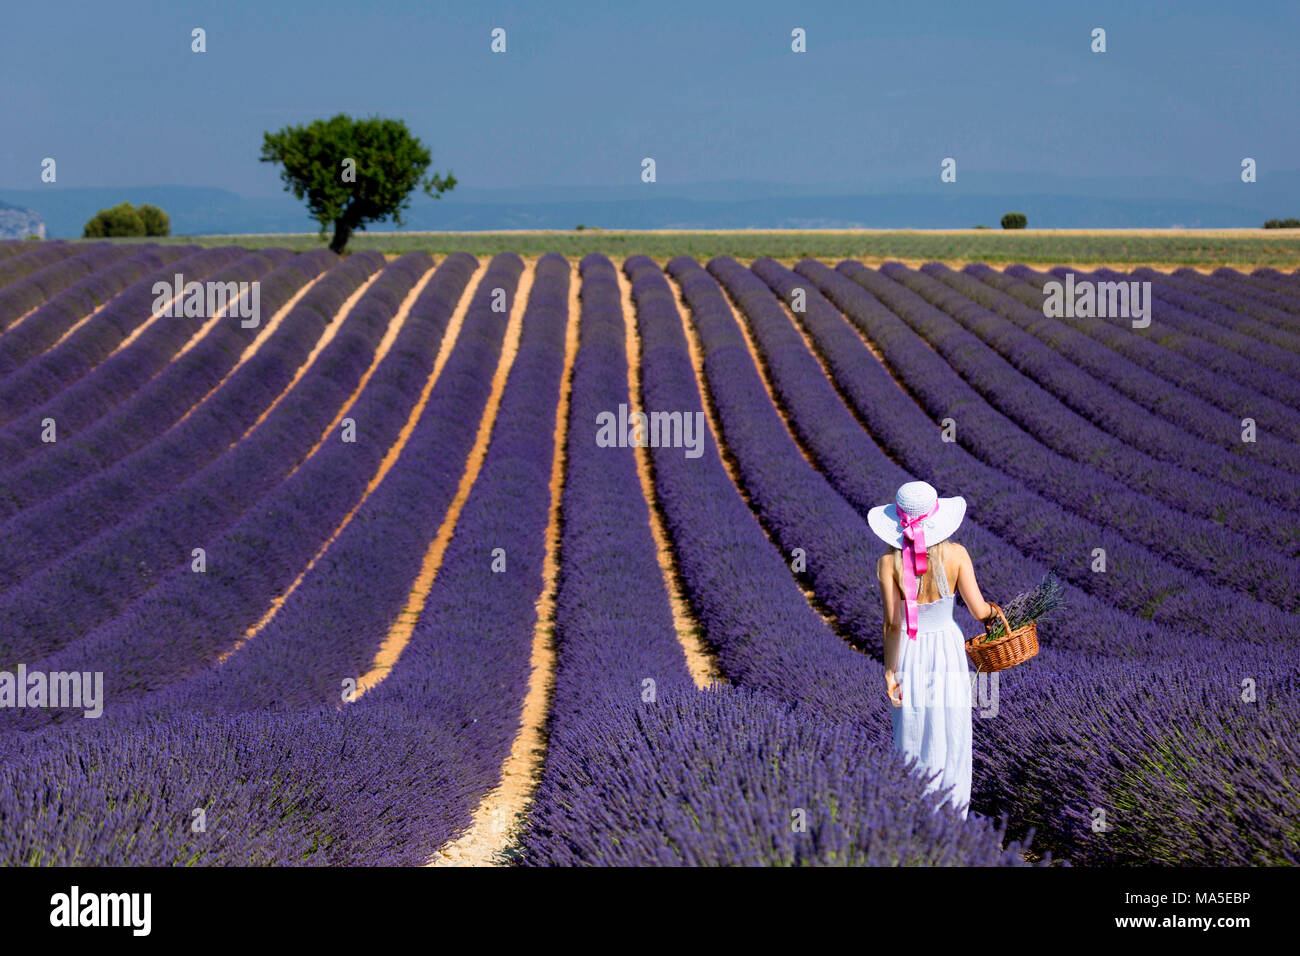 Girl in a white dress and hat in a lavender field carrying a basket of flowers, valensole, provence, france Stock Photo